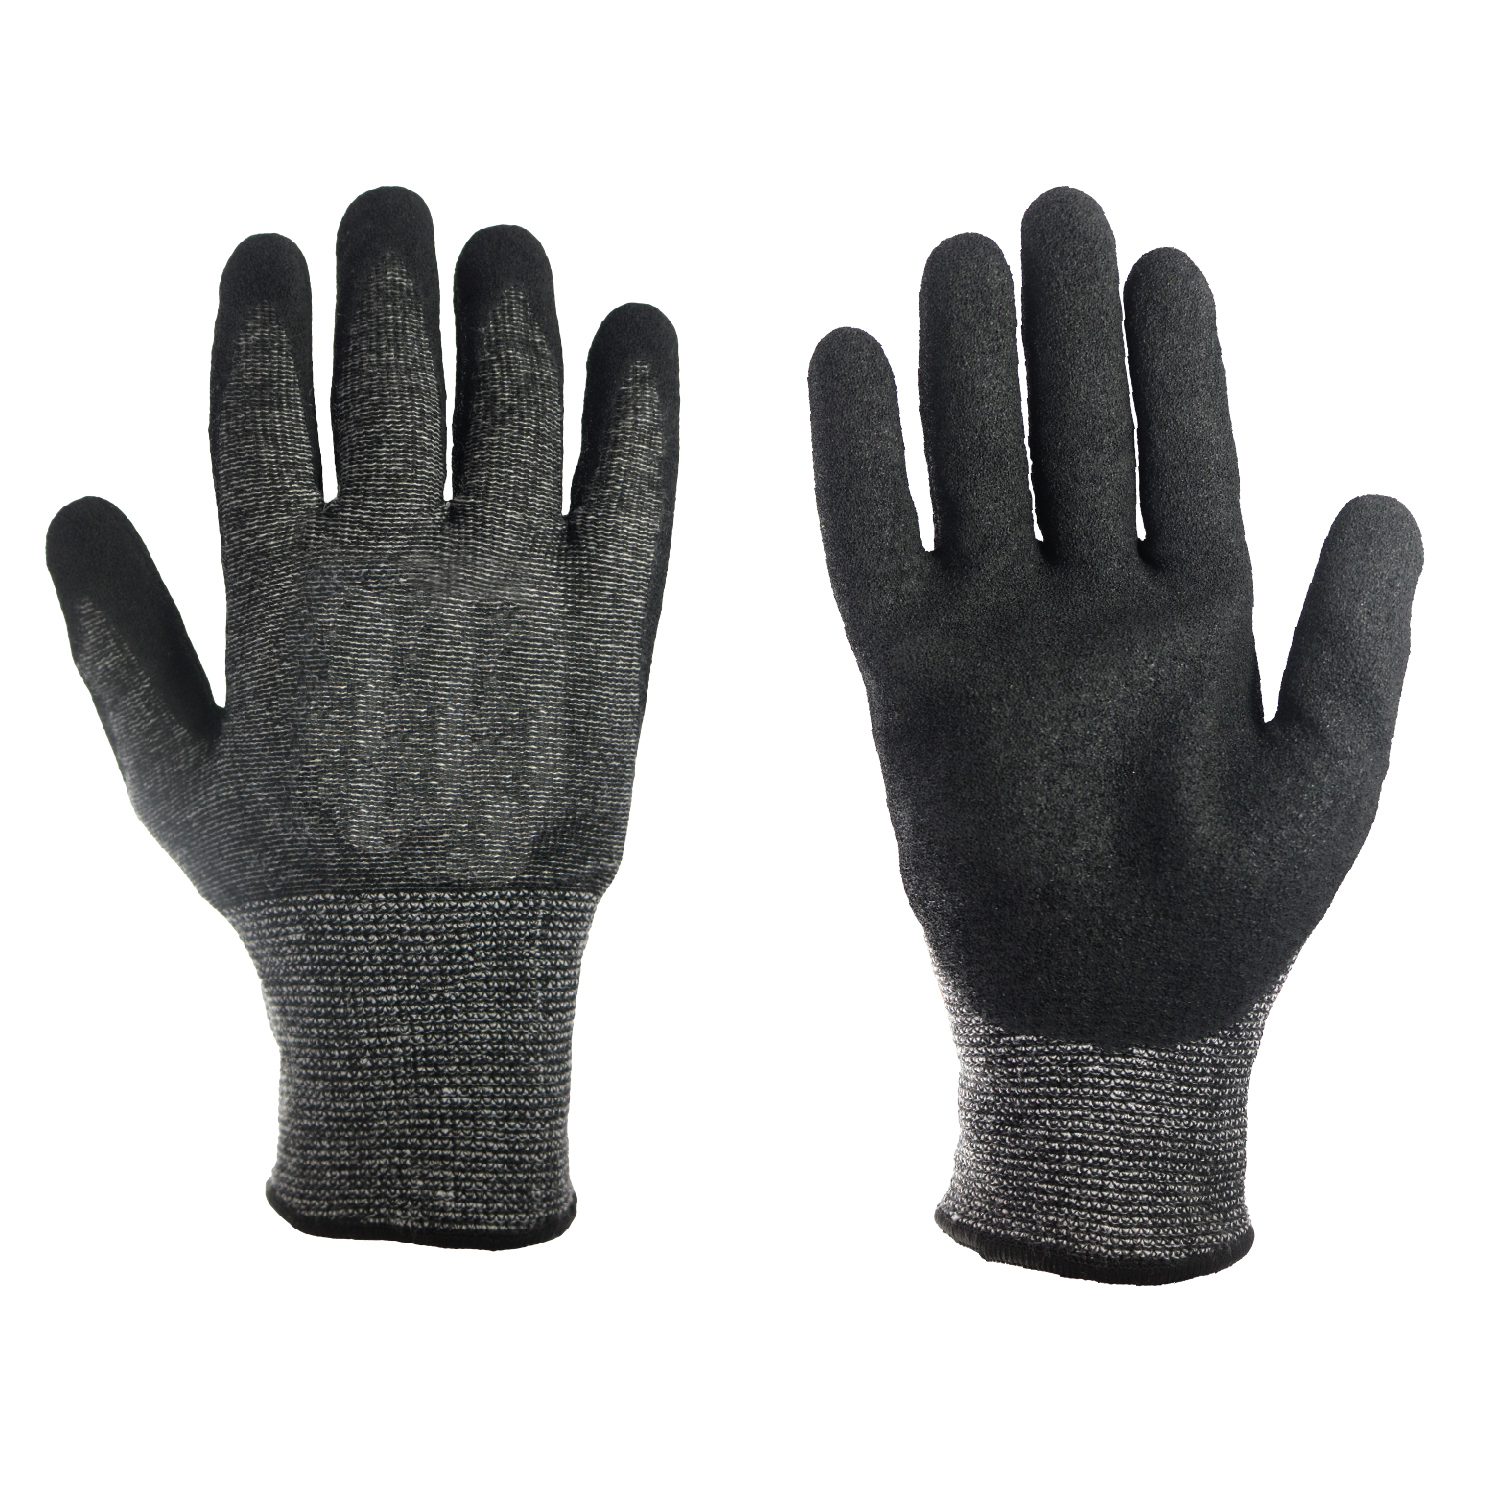 Gloves for Heat and Cut ProtectionBuy and SellHealth - BeautyAll Indiaother